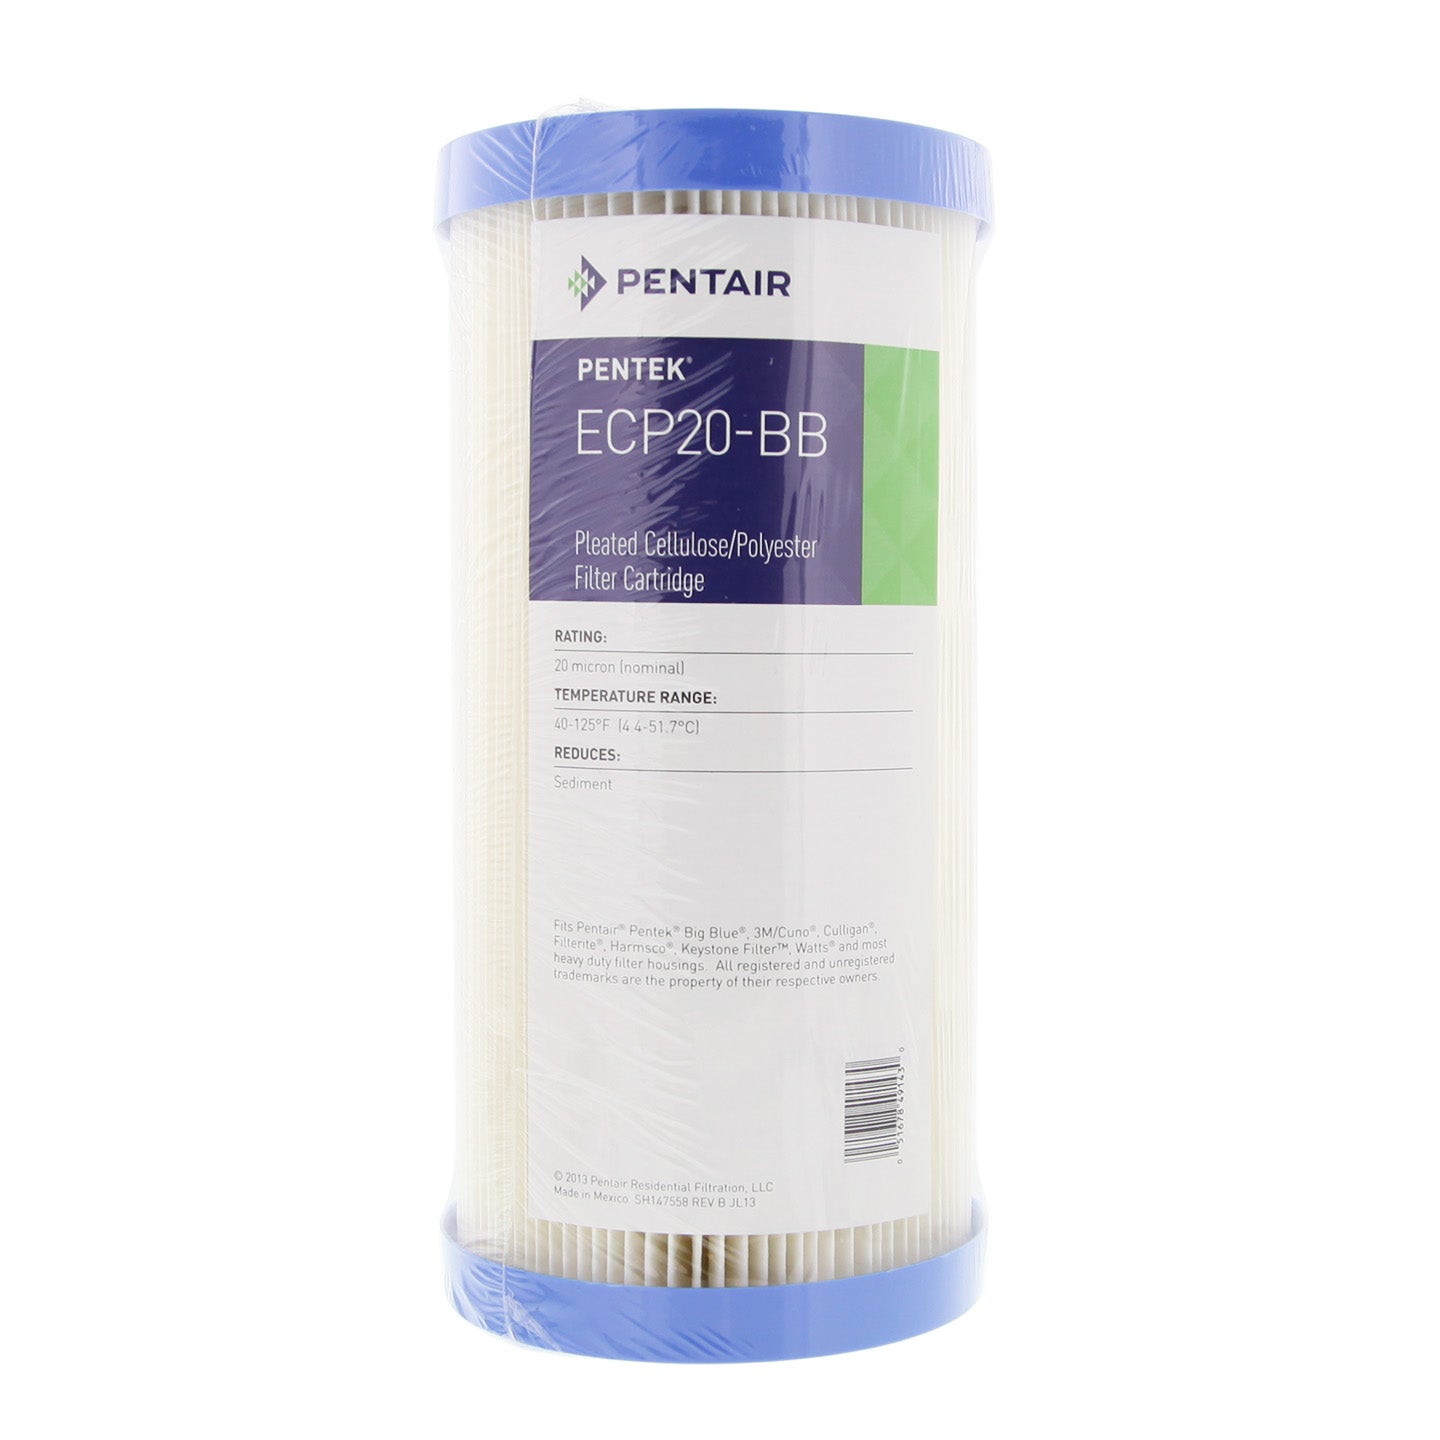 Pentek ECP20-BB Pleated Sediment Water Filter (9-3/4-inch x 4-1/2-inch) (In Wrap)